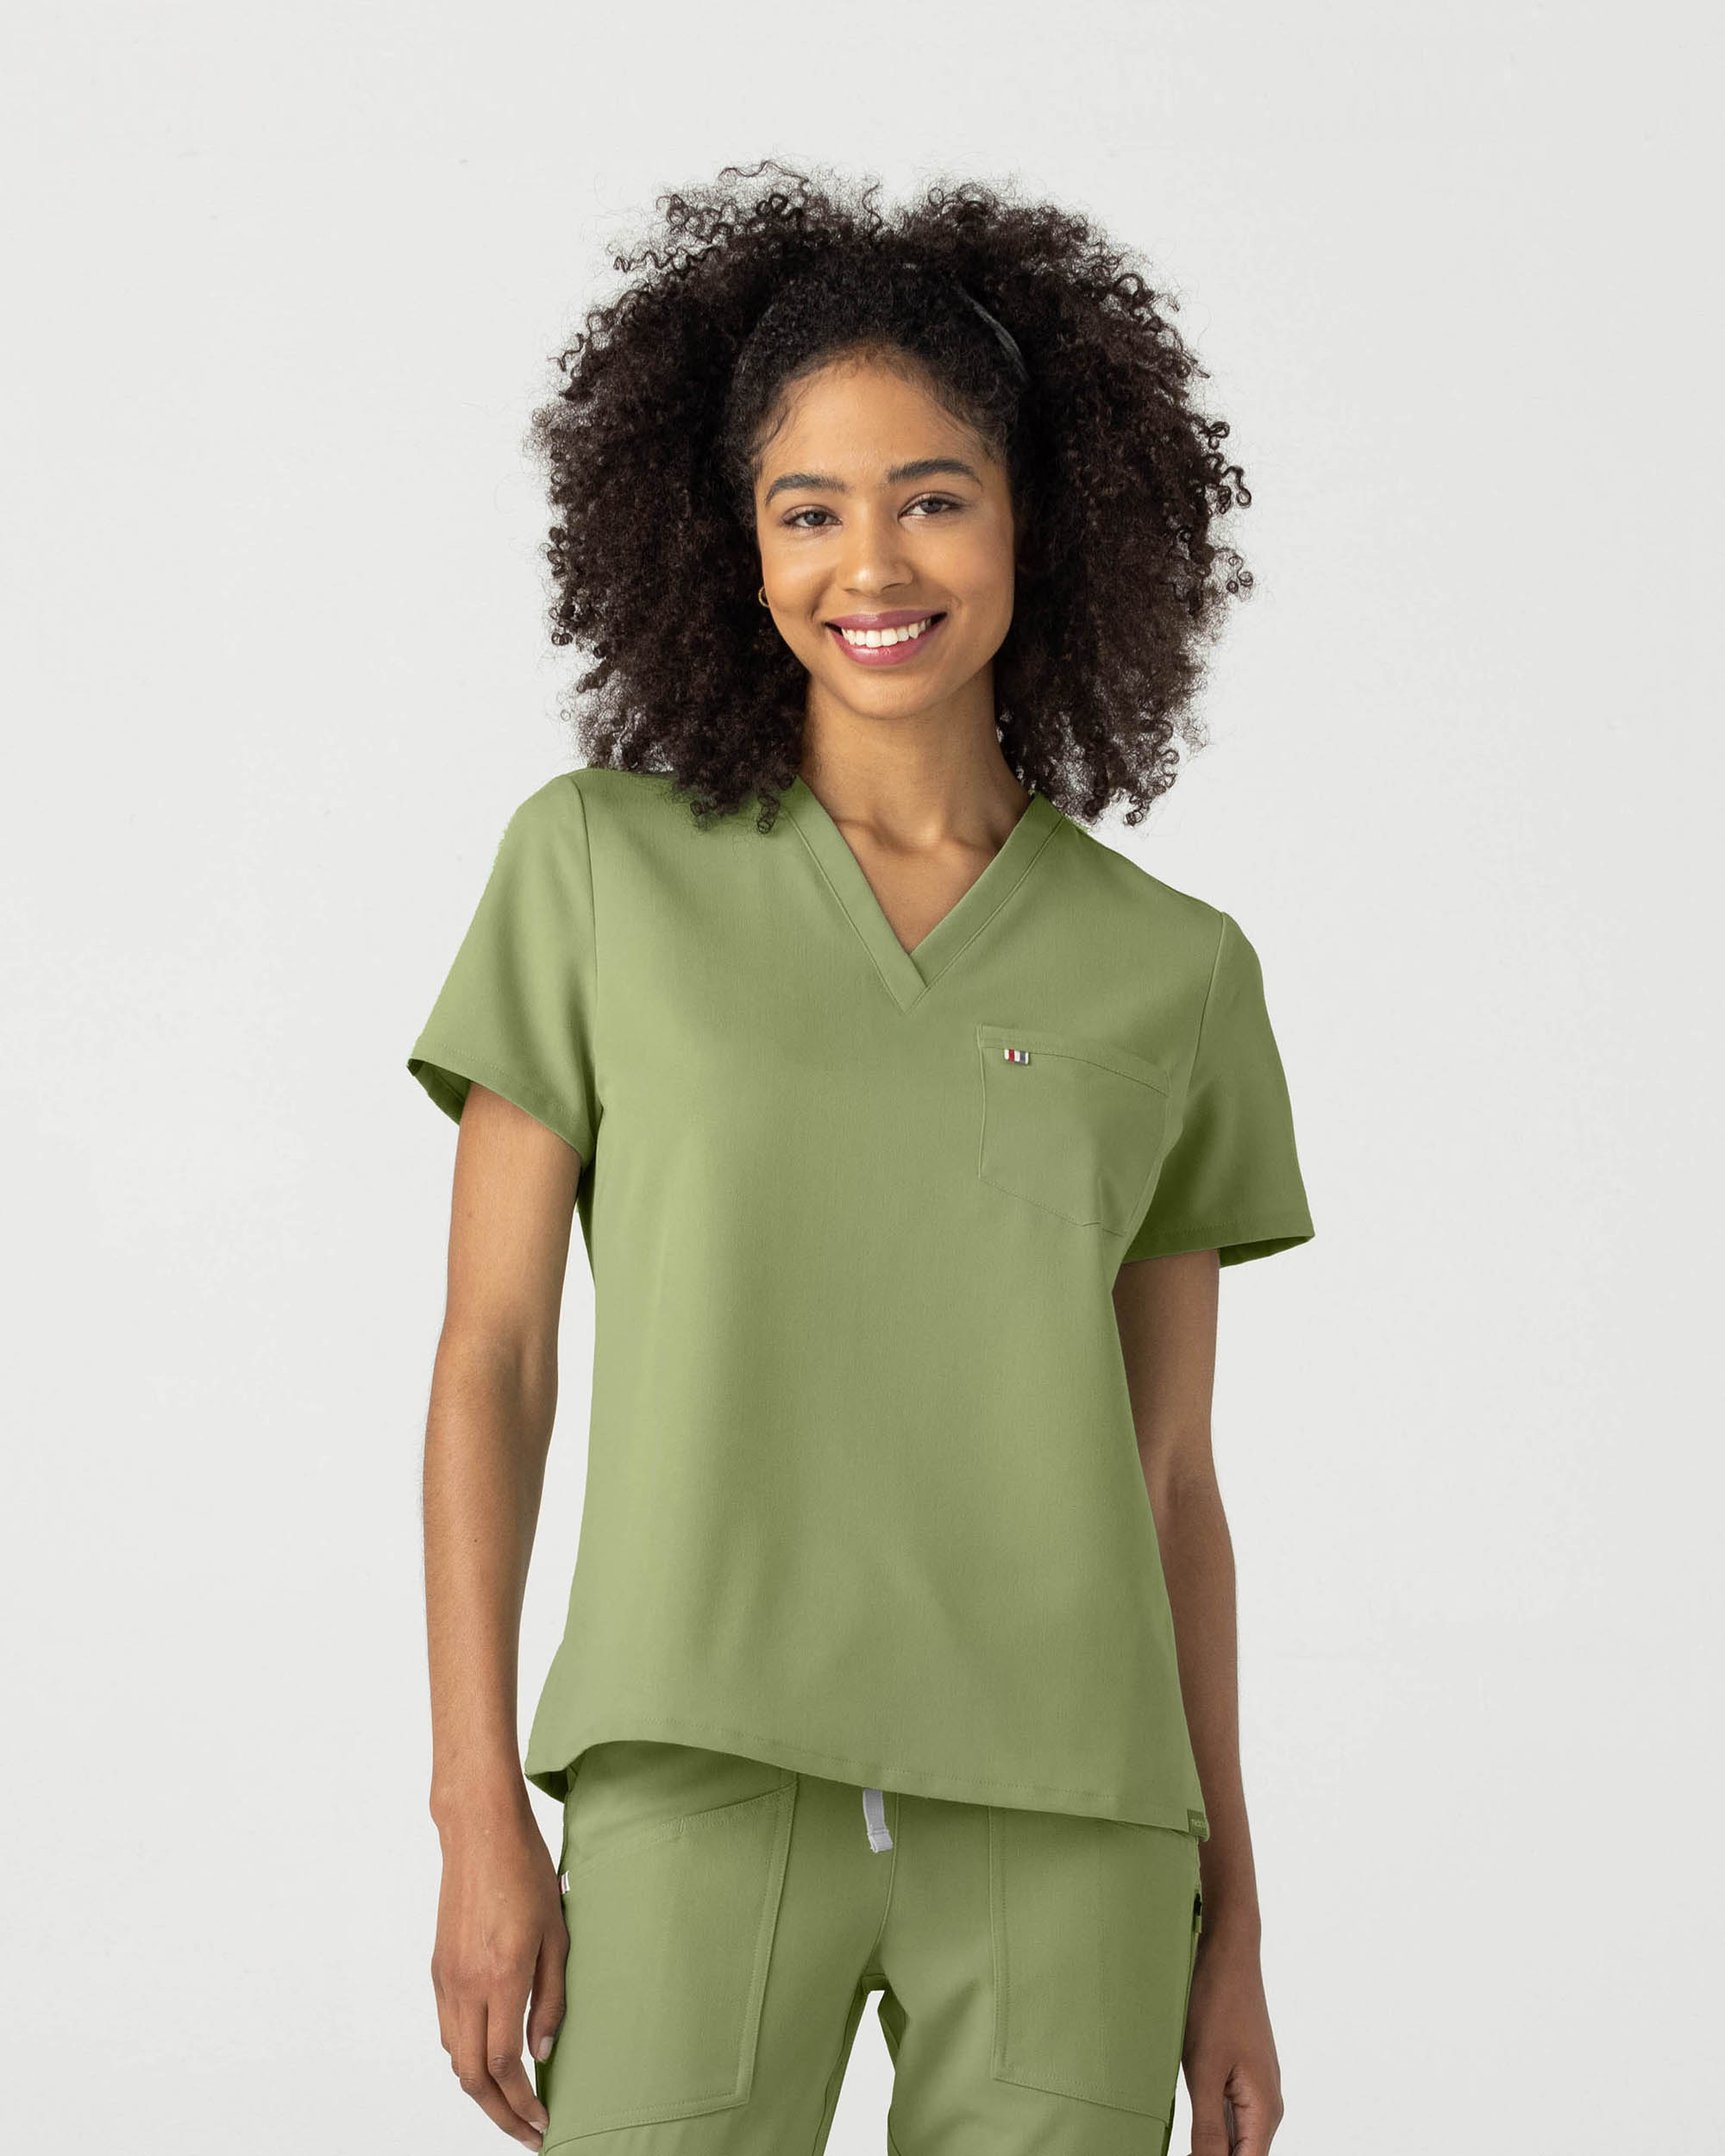 Womens Scrubs & Medical Uniforms, Sustainable & Eco Friendly